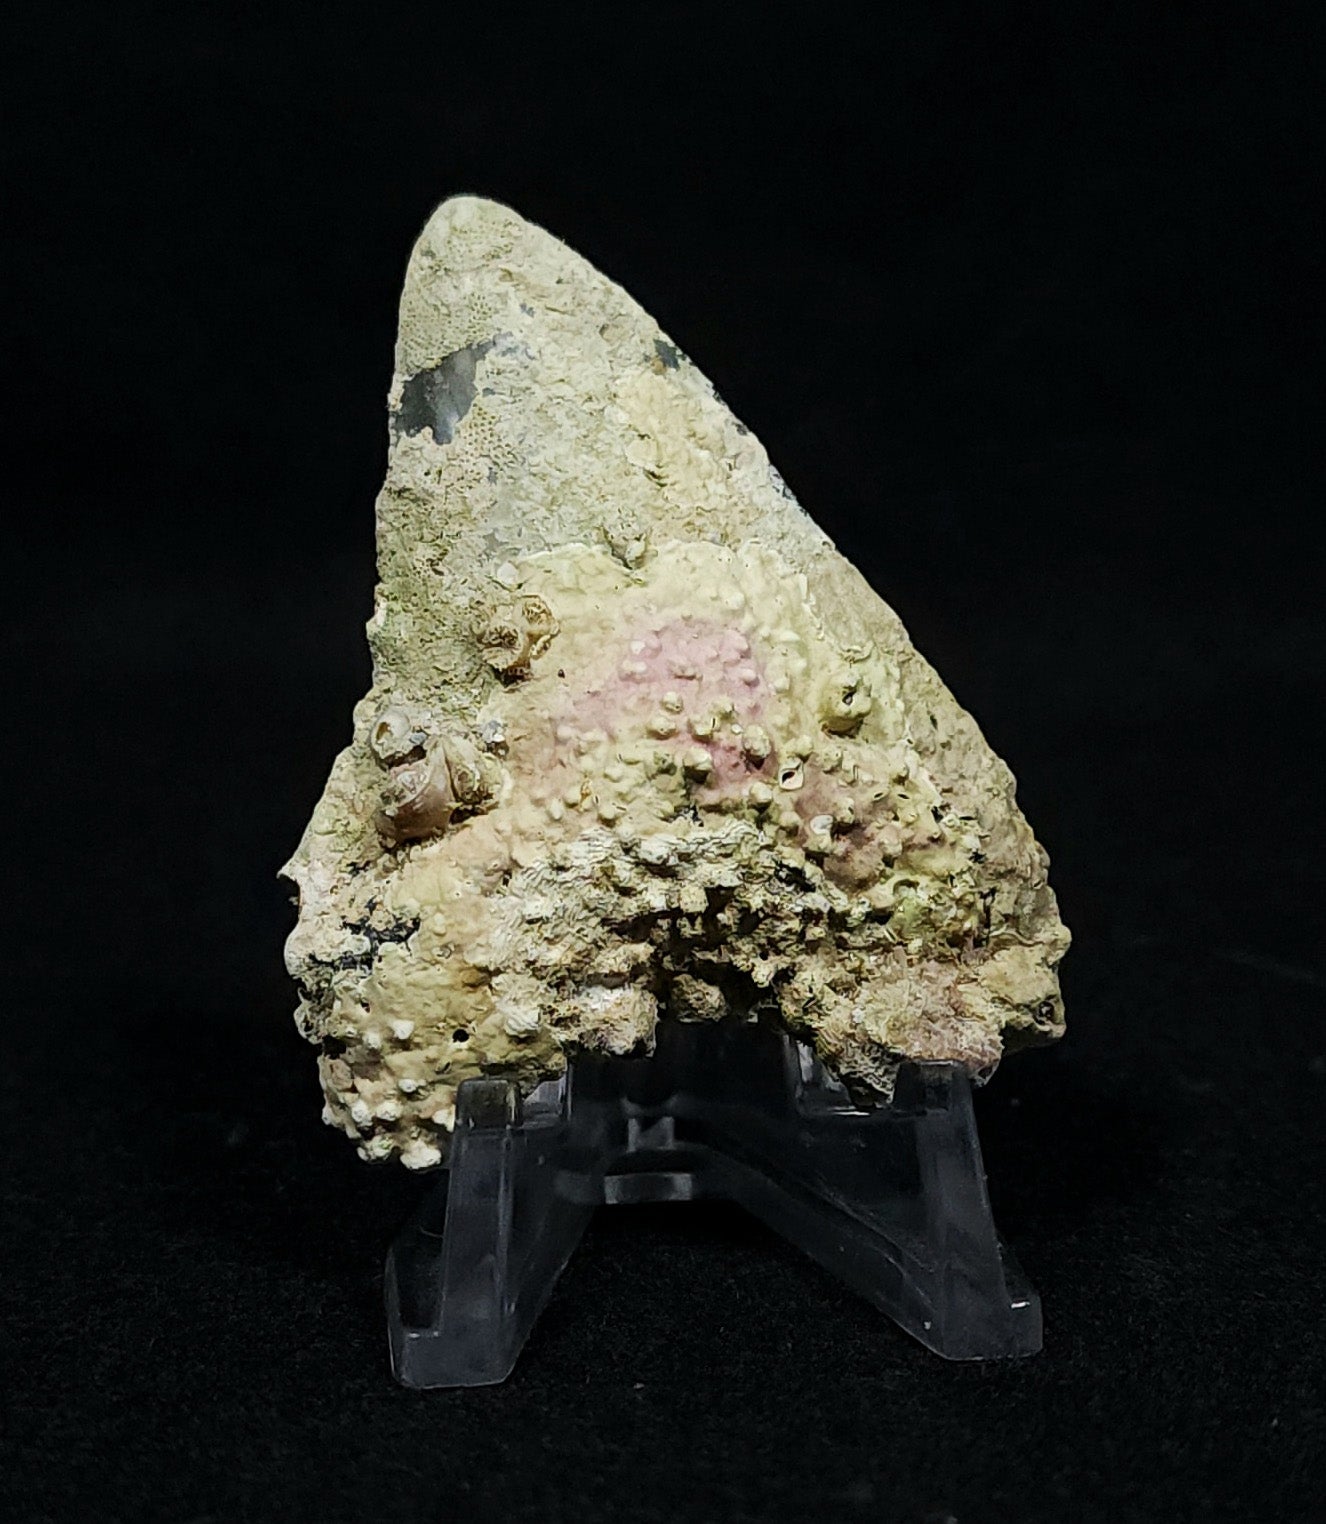 Encrusted 2.54" Fossil Megalodon Tooth - Venice, FL